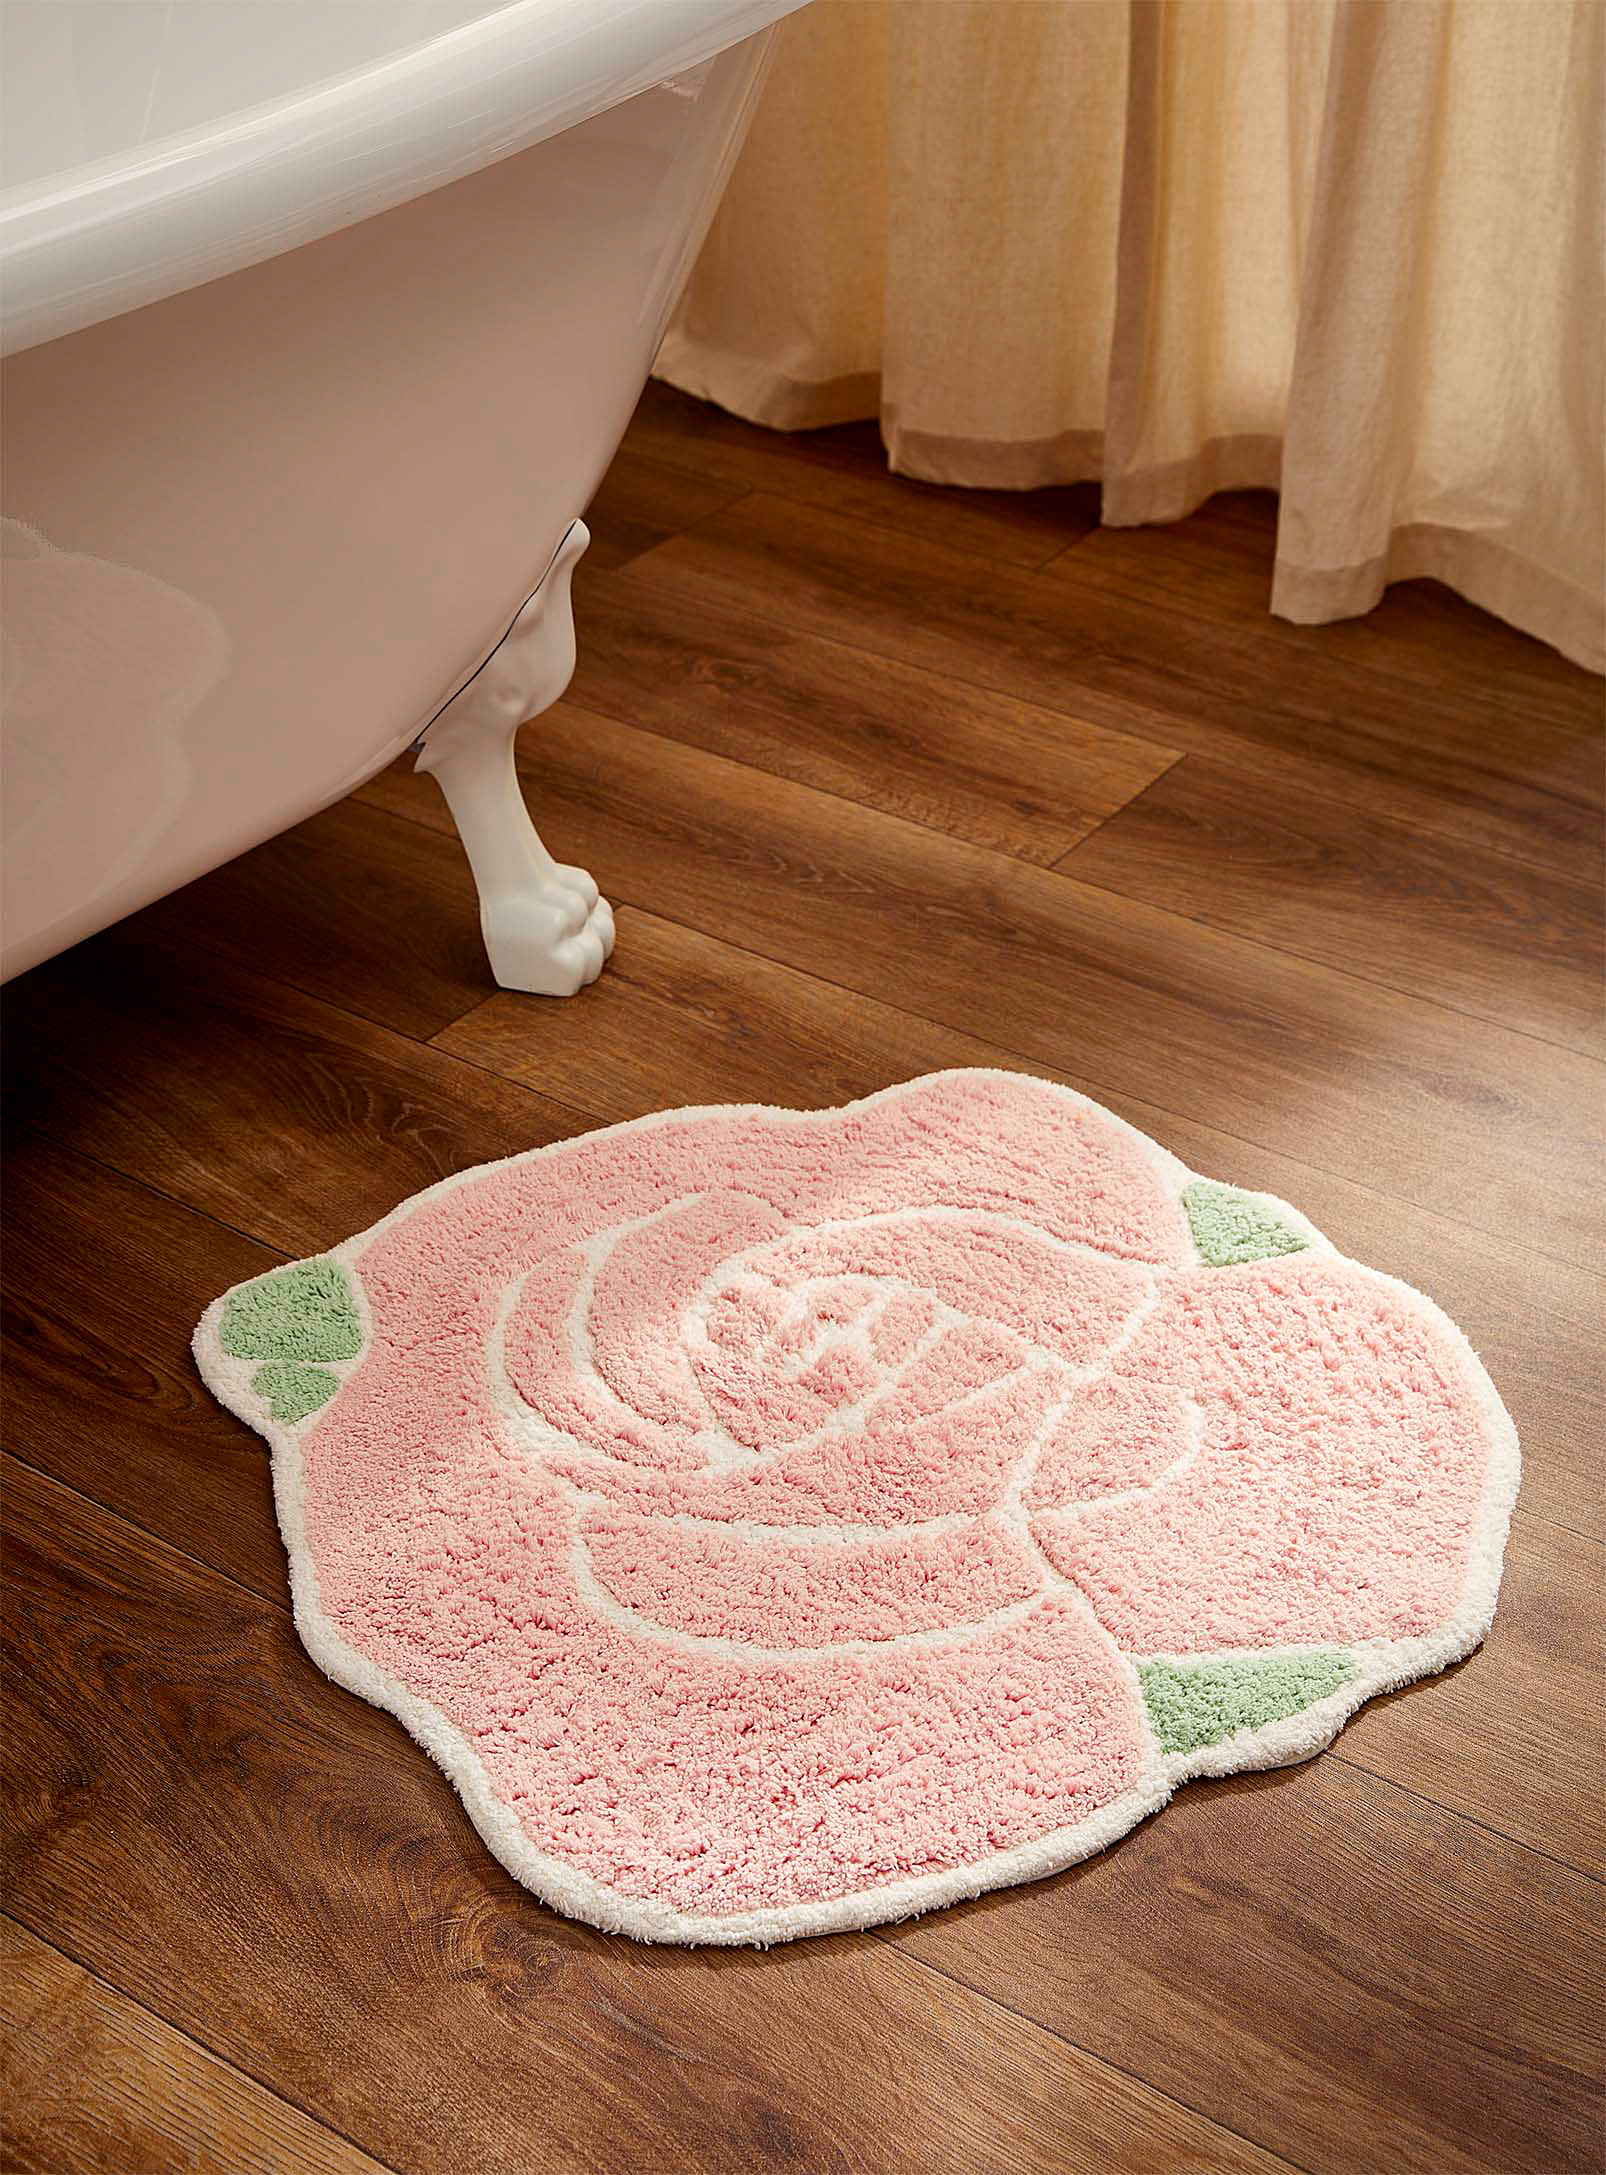 Simons Maison Large Rose Recycled Cotton Bath Mat 60 X 60 Cm In Pink